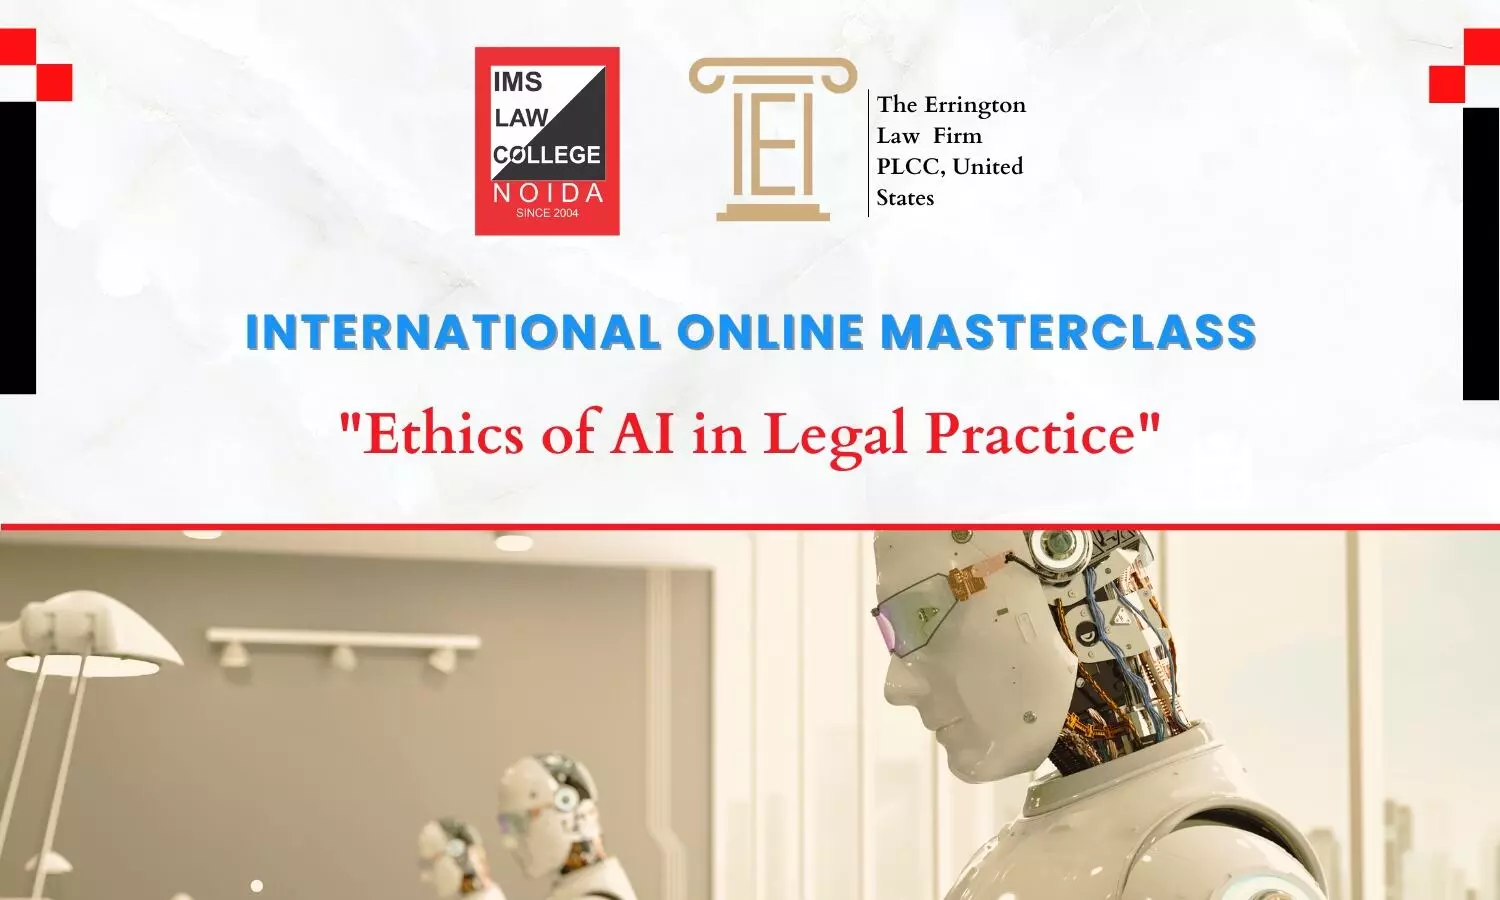 Online Masterclass Ethics of AI in Legal Practice  IMS Law College Noida